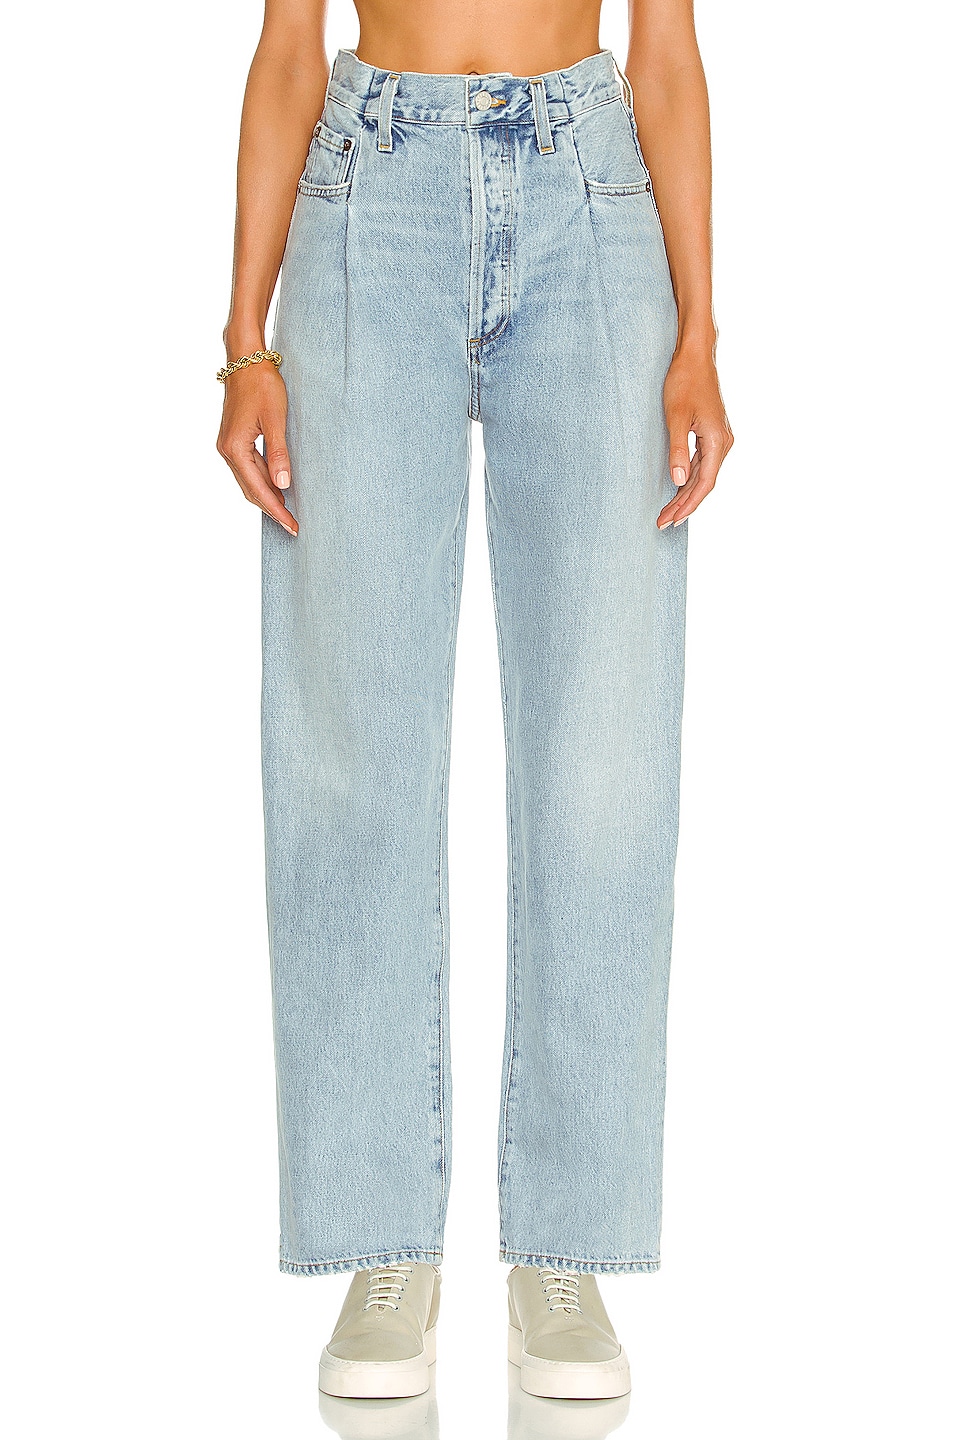 Image 1 of AGOLDE Fold Waistband Jean in Sideline